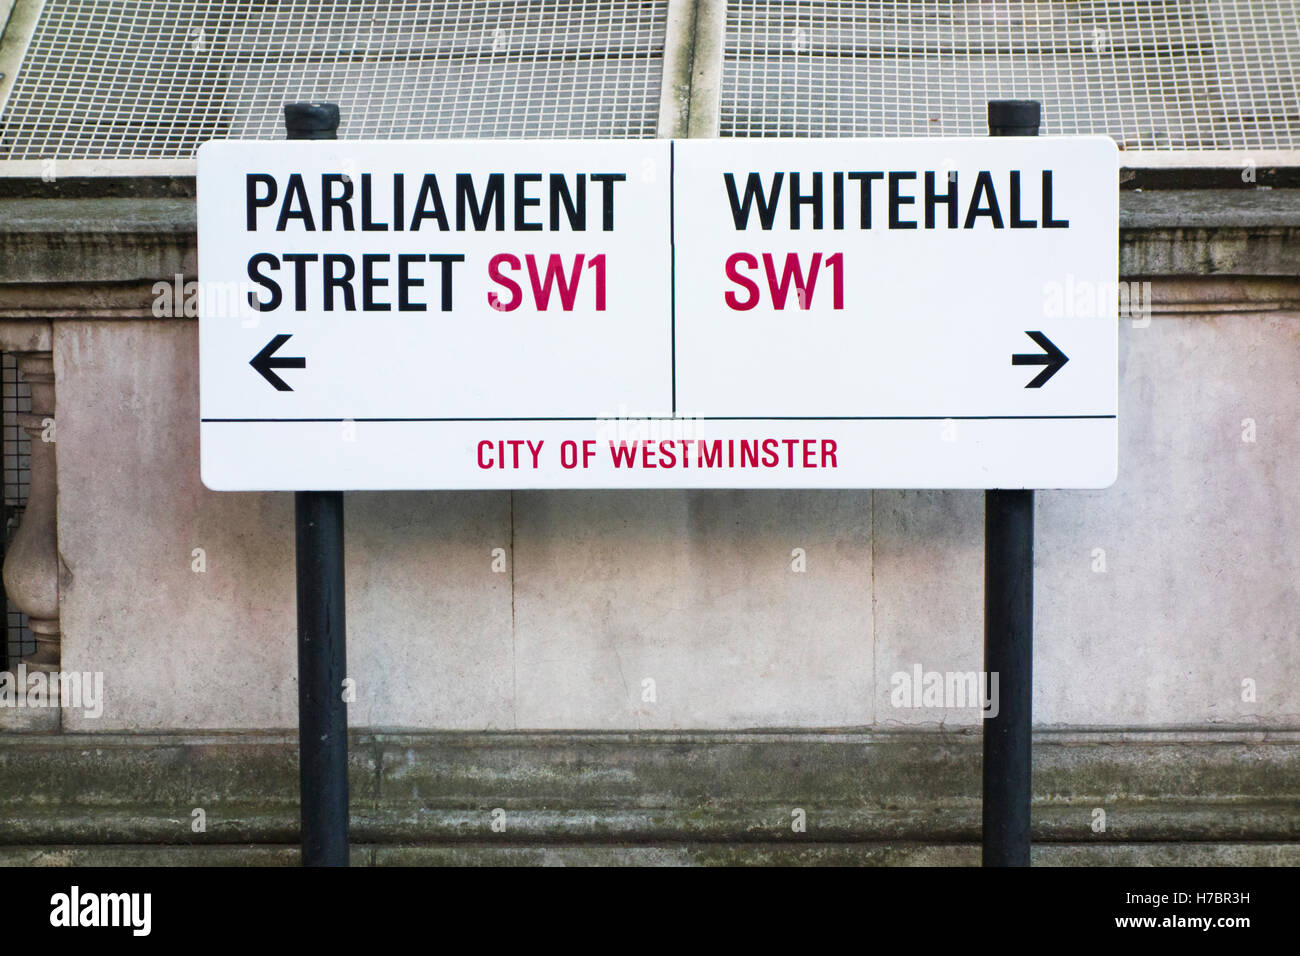 Parliament Street and Whitehall sign with arrows pointing in different directions. London, UK Stock Photo